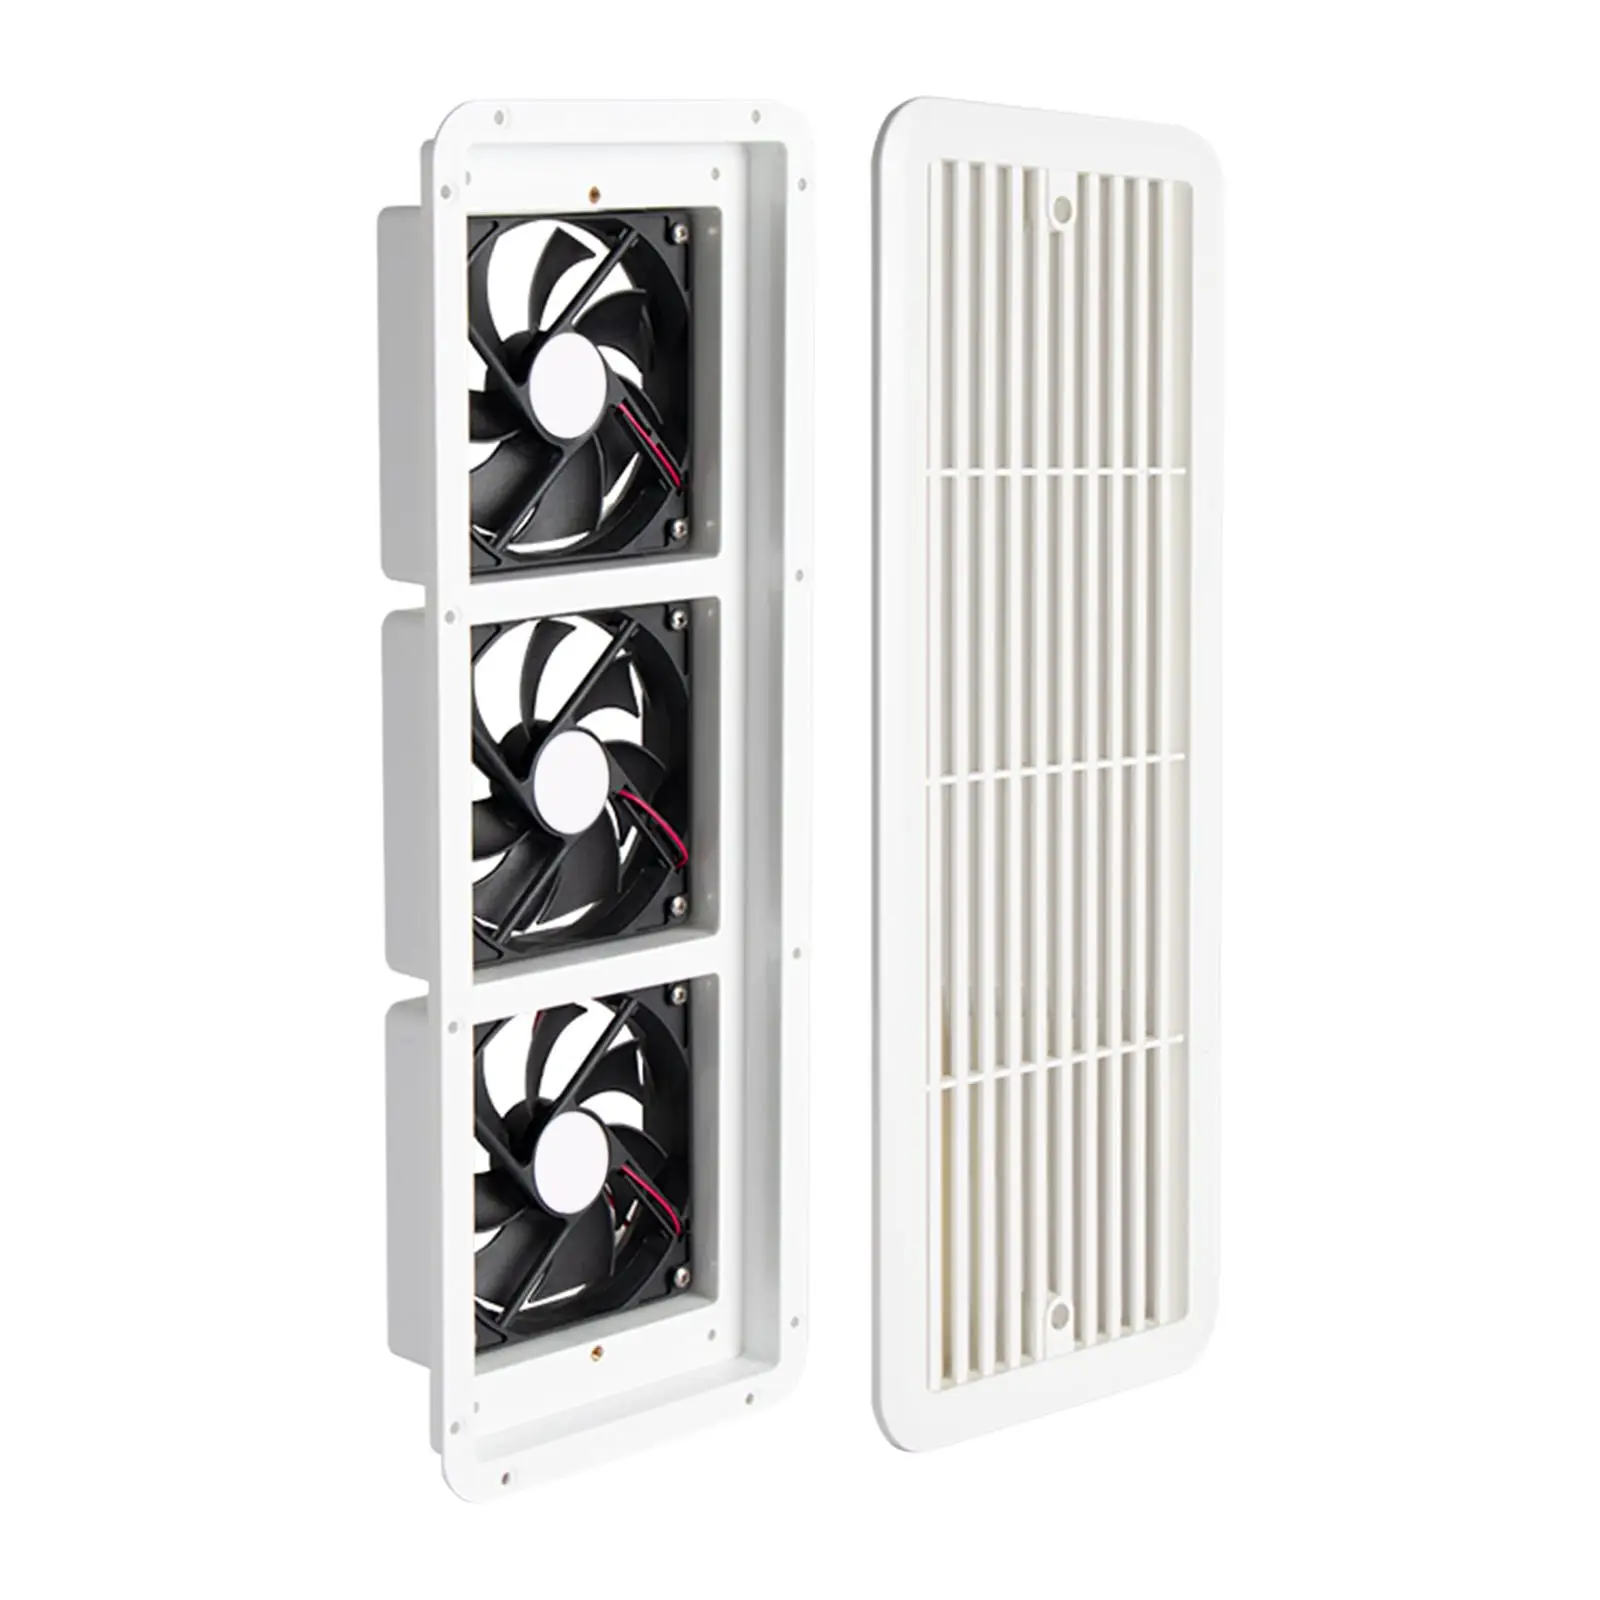 Rack Mounted Cooling Fan with Speed Controller Multifunction for Fridge Vent Ventilation Grille Caravan Motorhome Cabinets